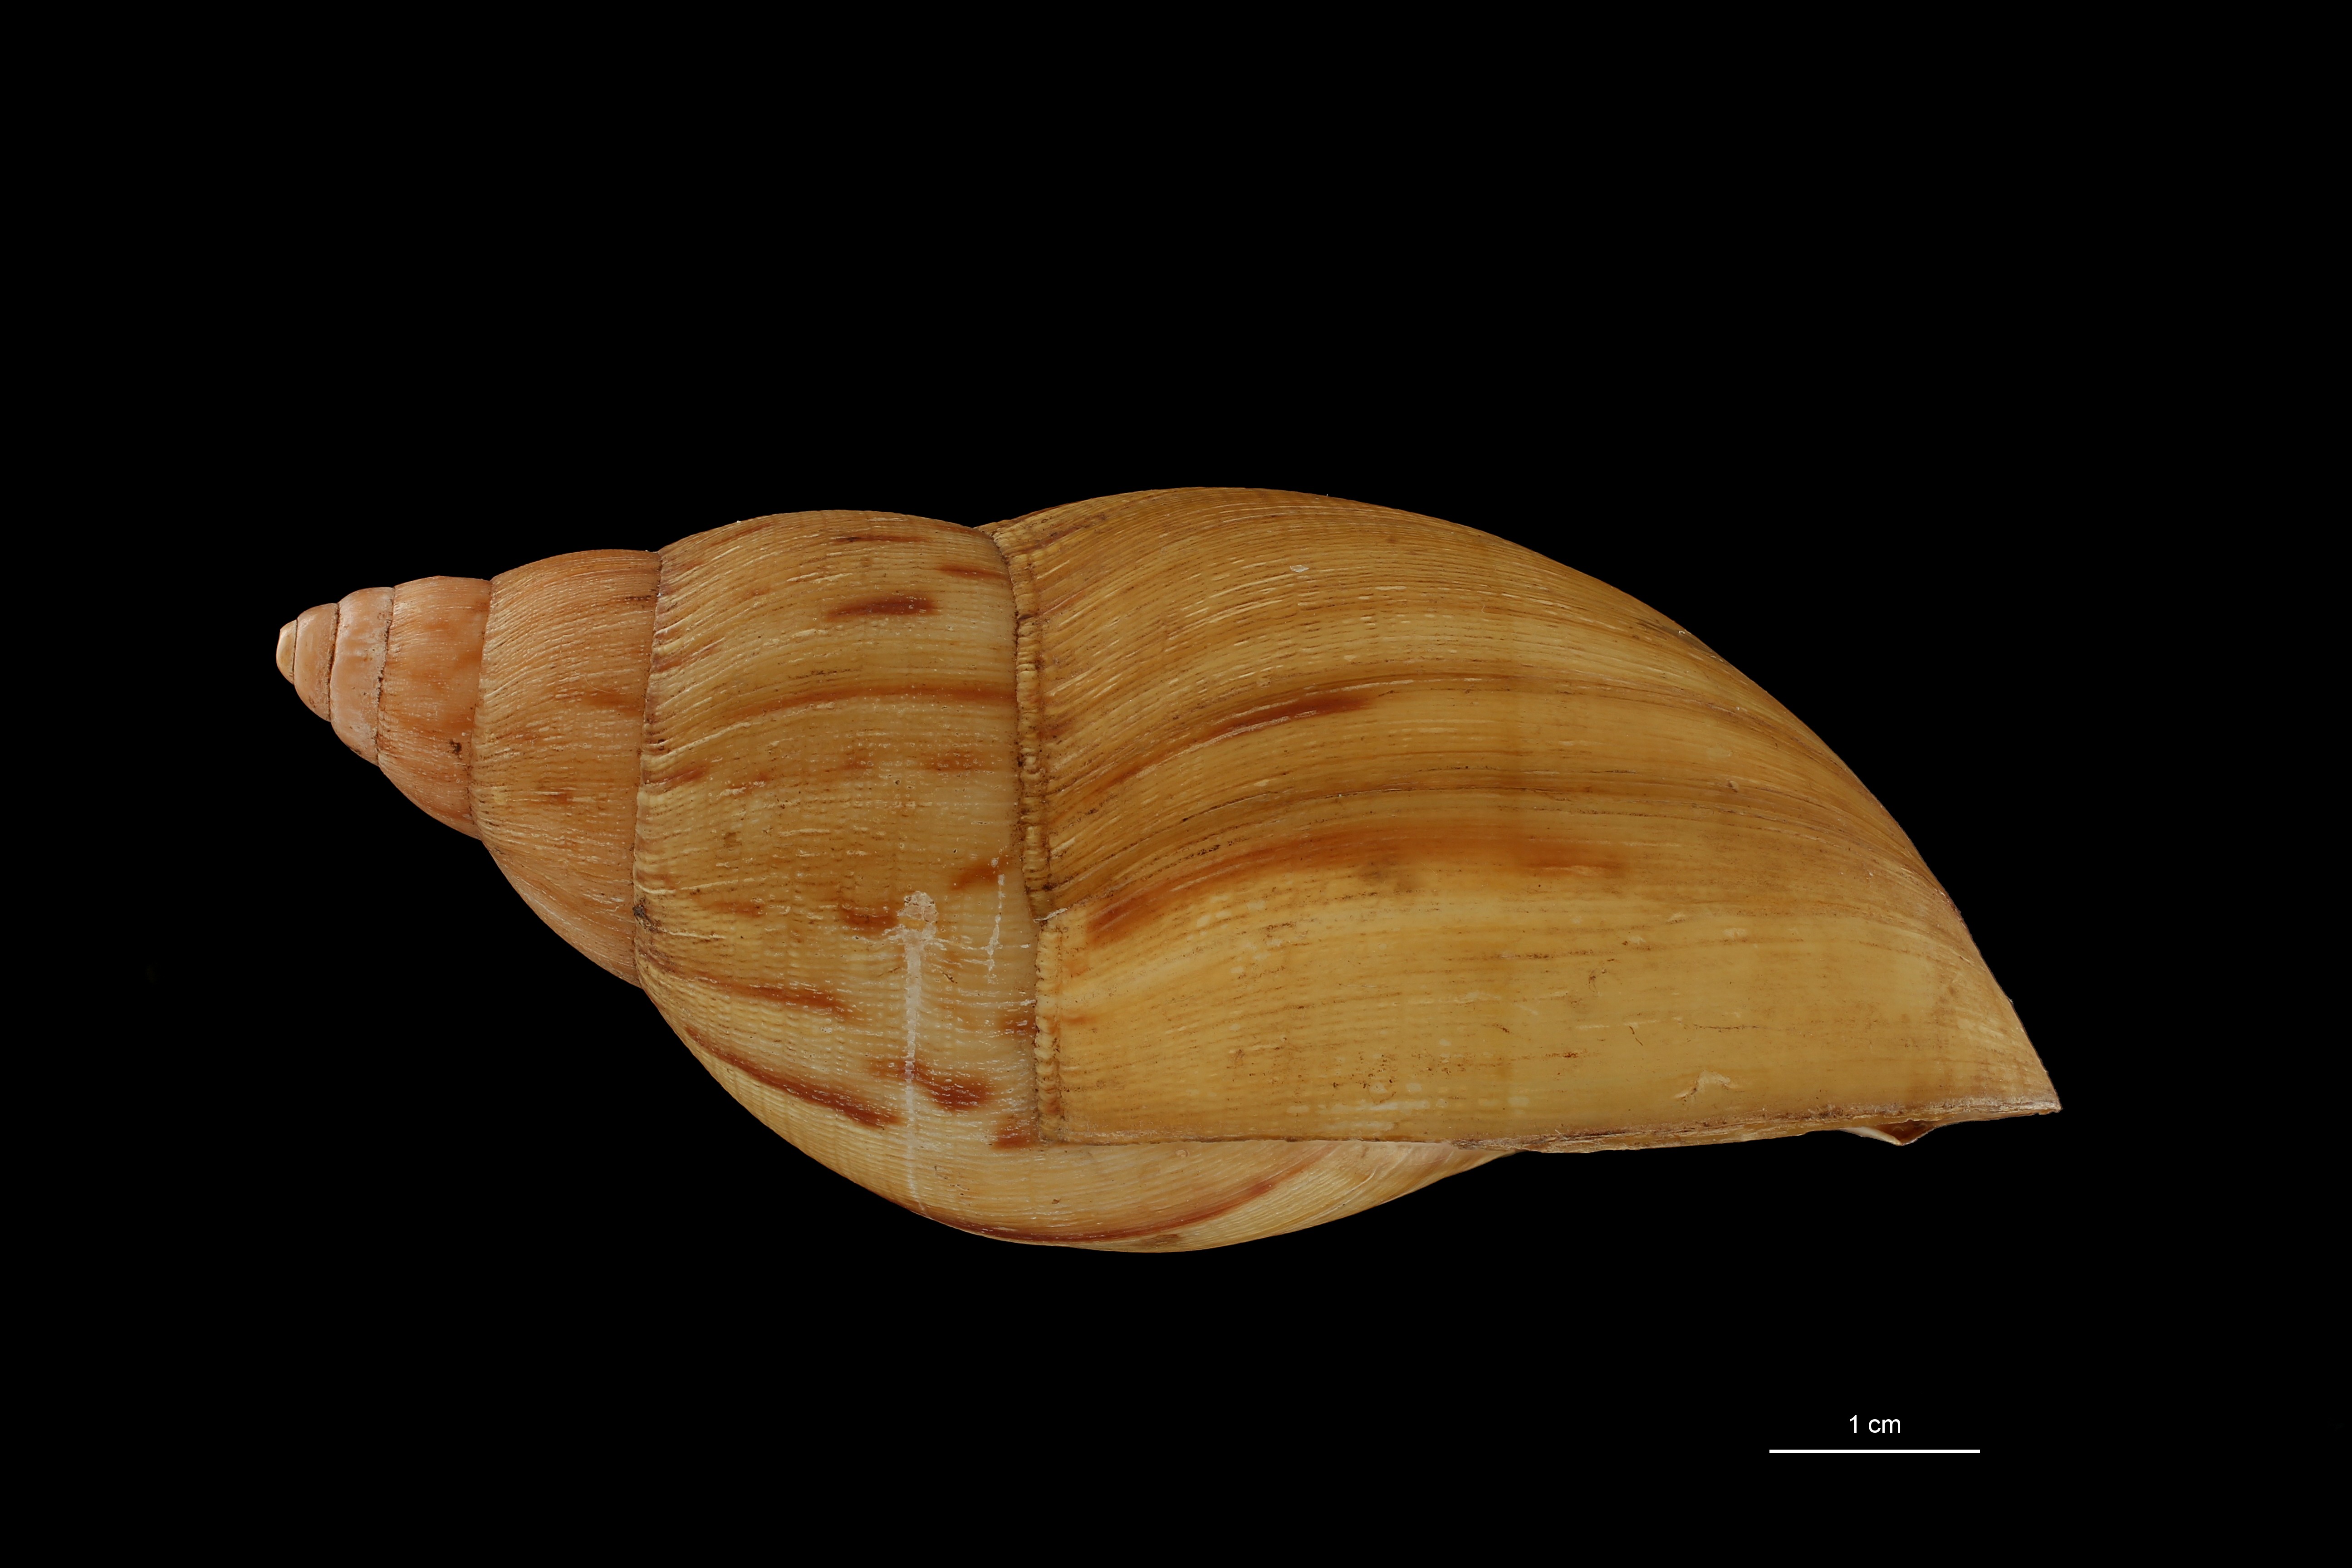 BE-RBINS-INV COTYPE MT 170 Achatina iredalei LATERAL ZS DMap Scaled.jpg